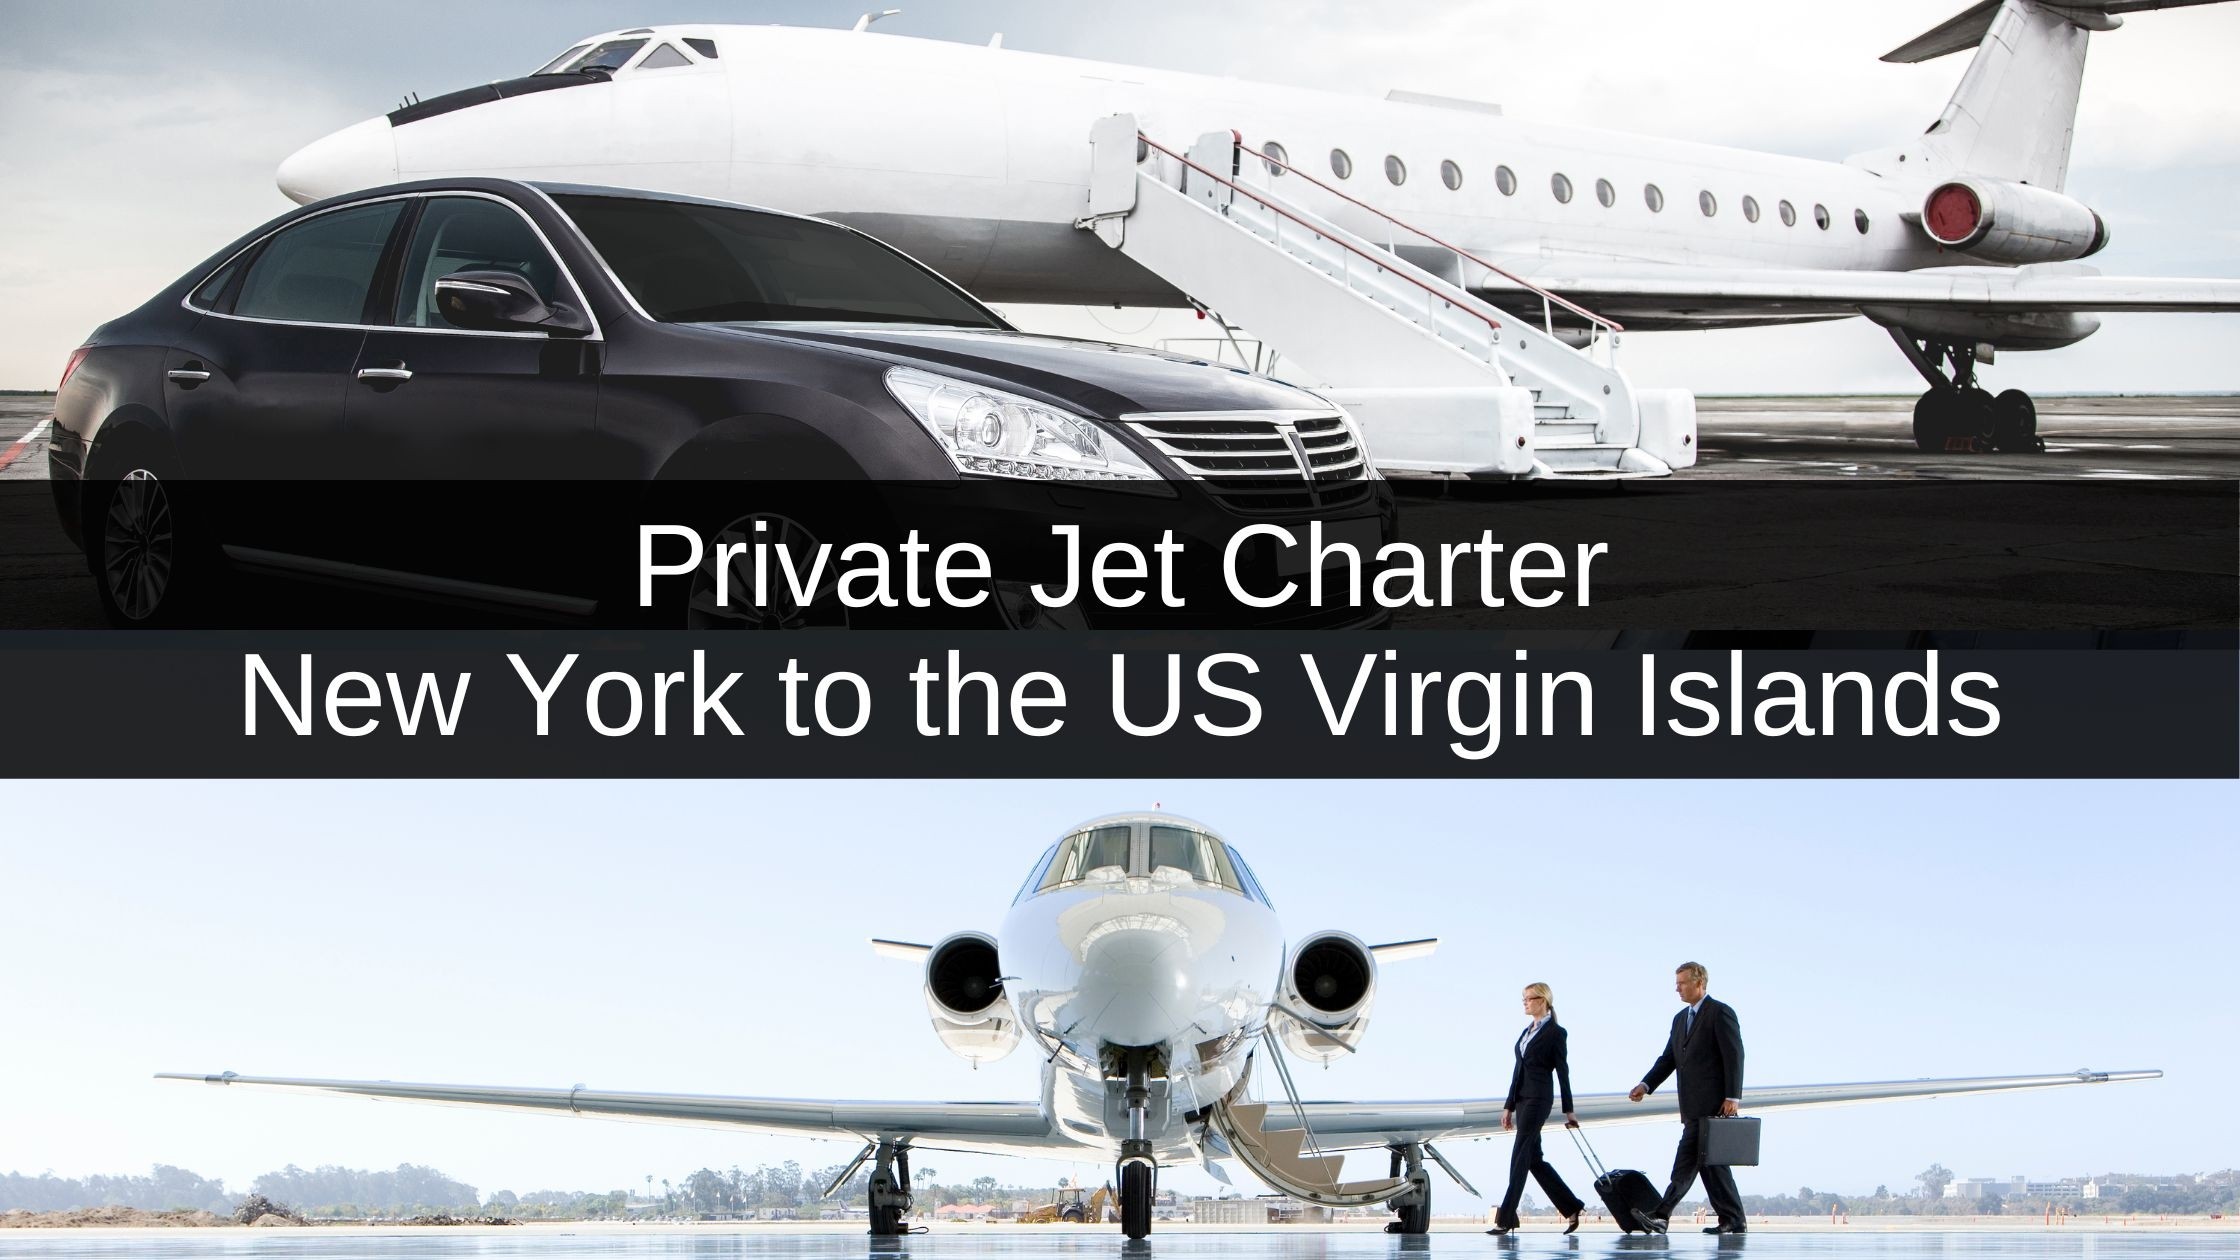 Private Jet Charter from New York to the US Virgin Islands